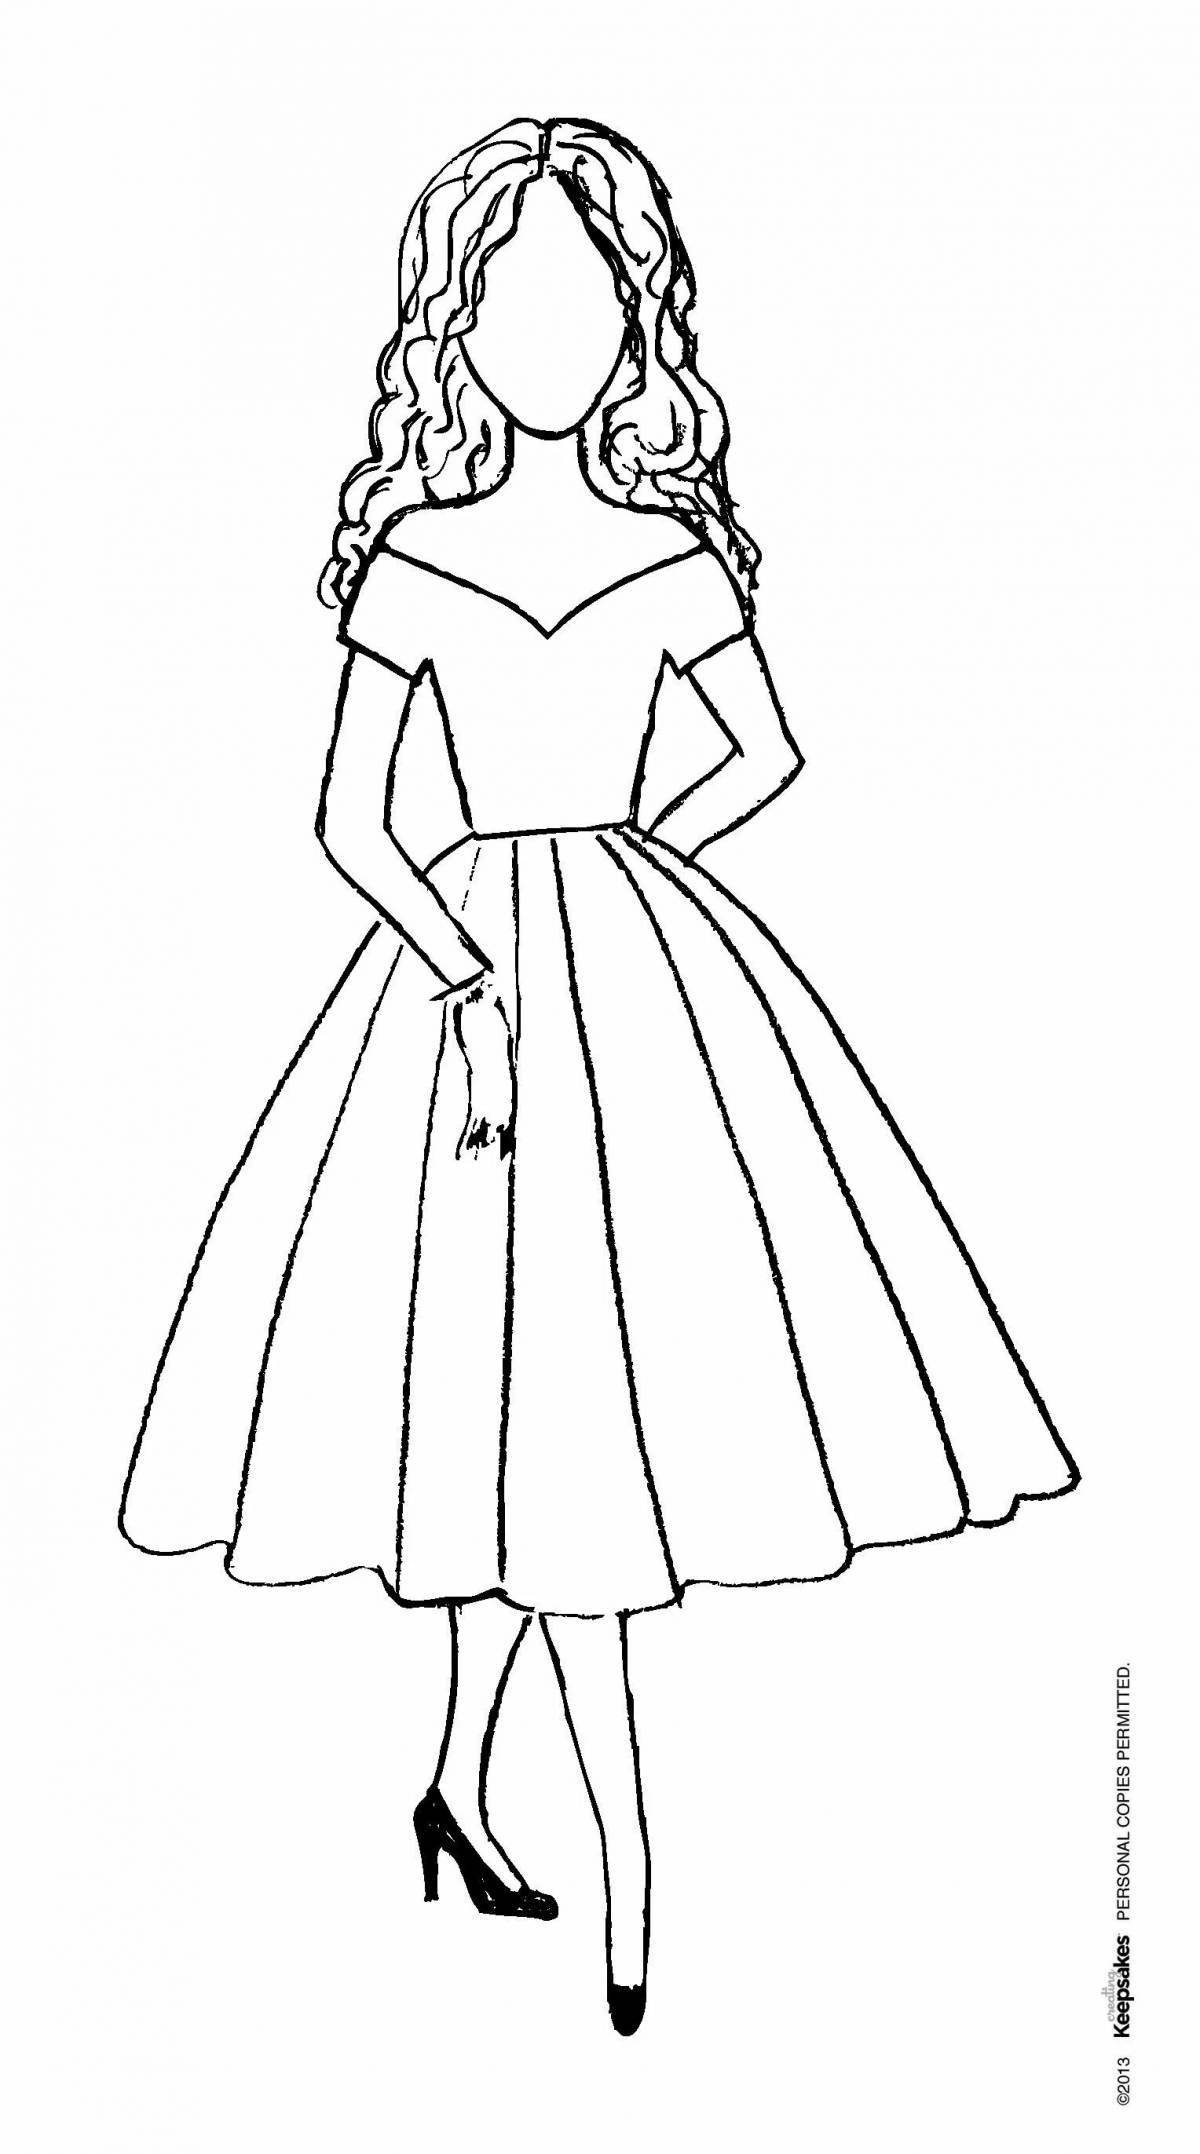 Radiant coloring page full body woman